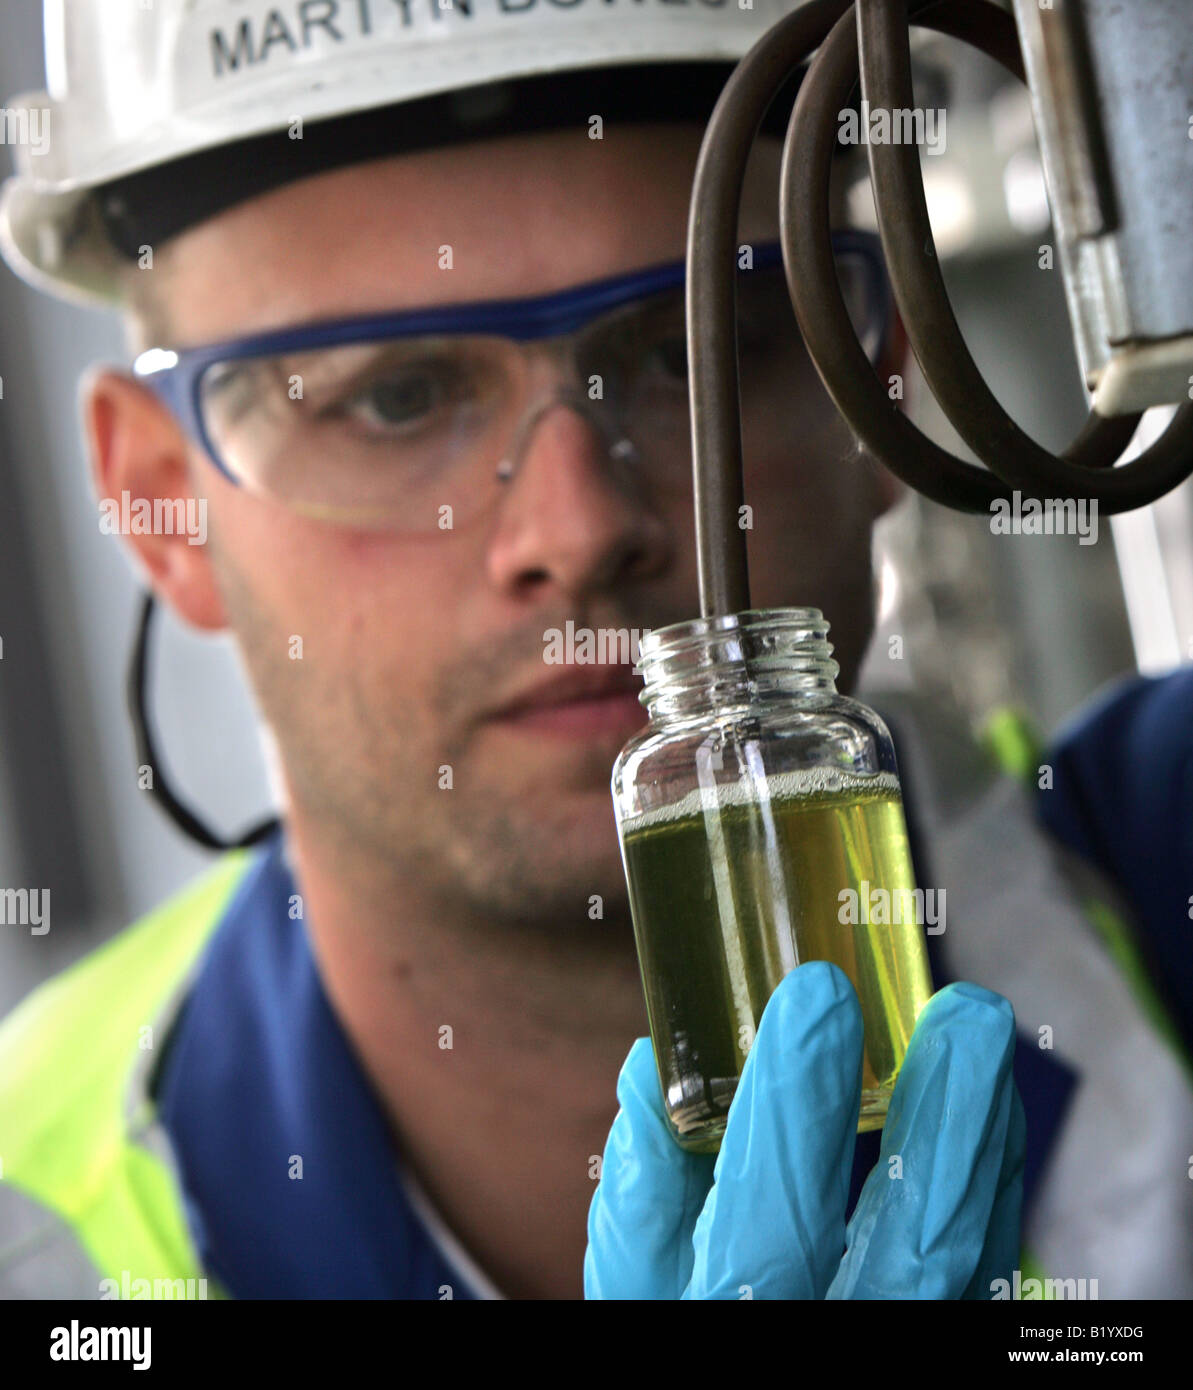 An engineer takes a sample of biodiesel at a plant on Teesside, UK. Stock Photo